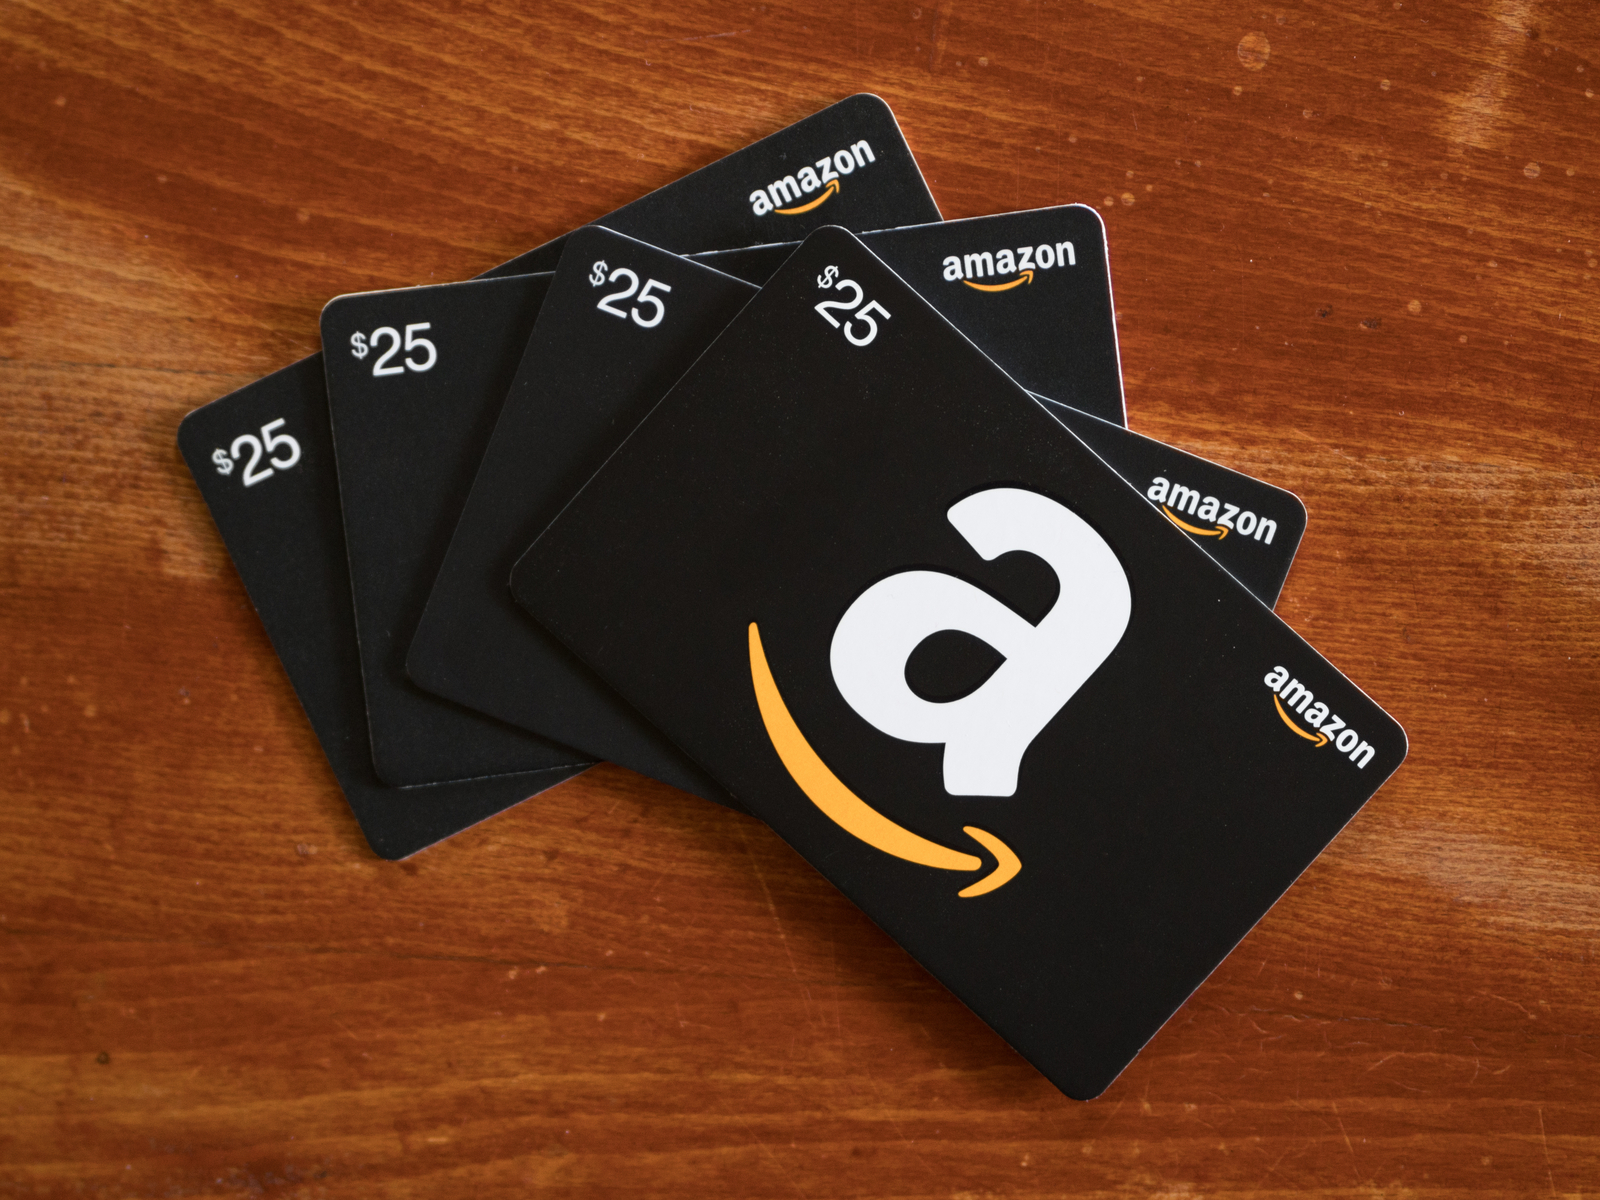 Bitcoin amazon gift card cryptocurrency wallet apical